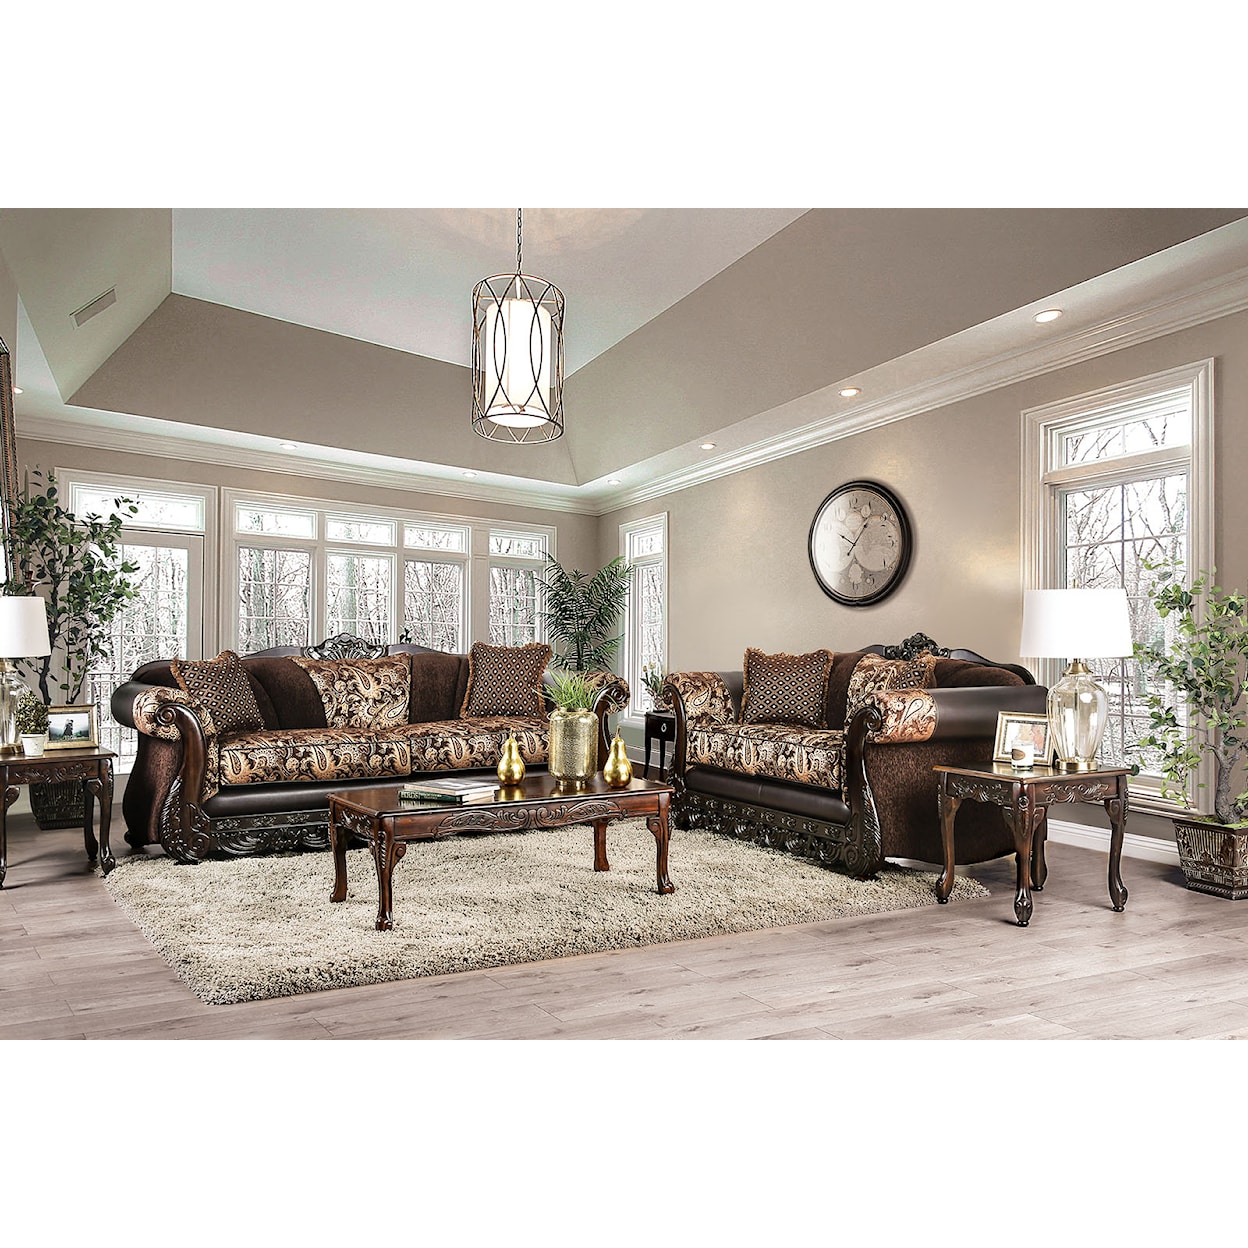 Furniture of America Newdale Sofa and Loveseat Set 